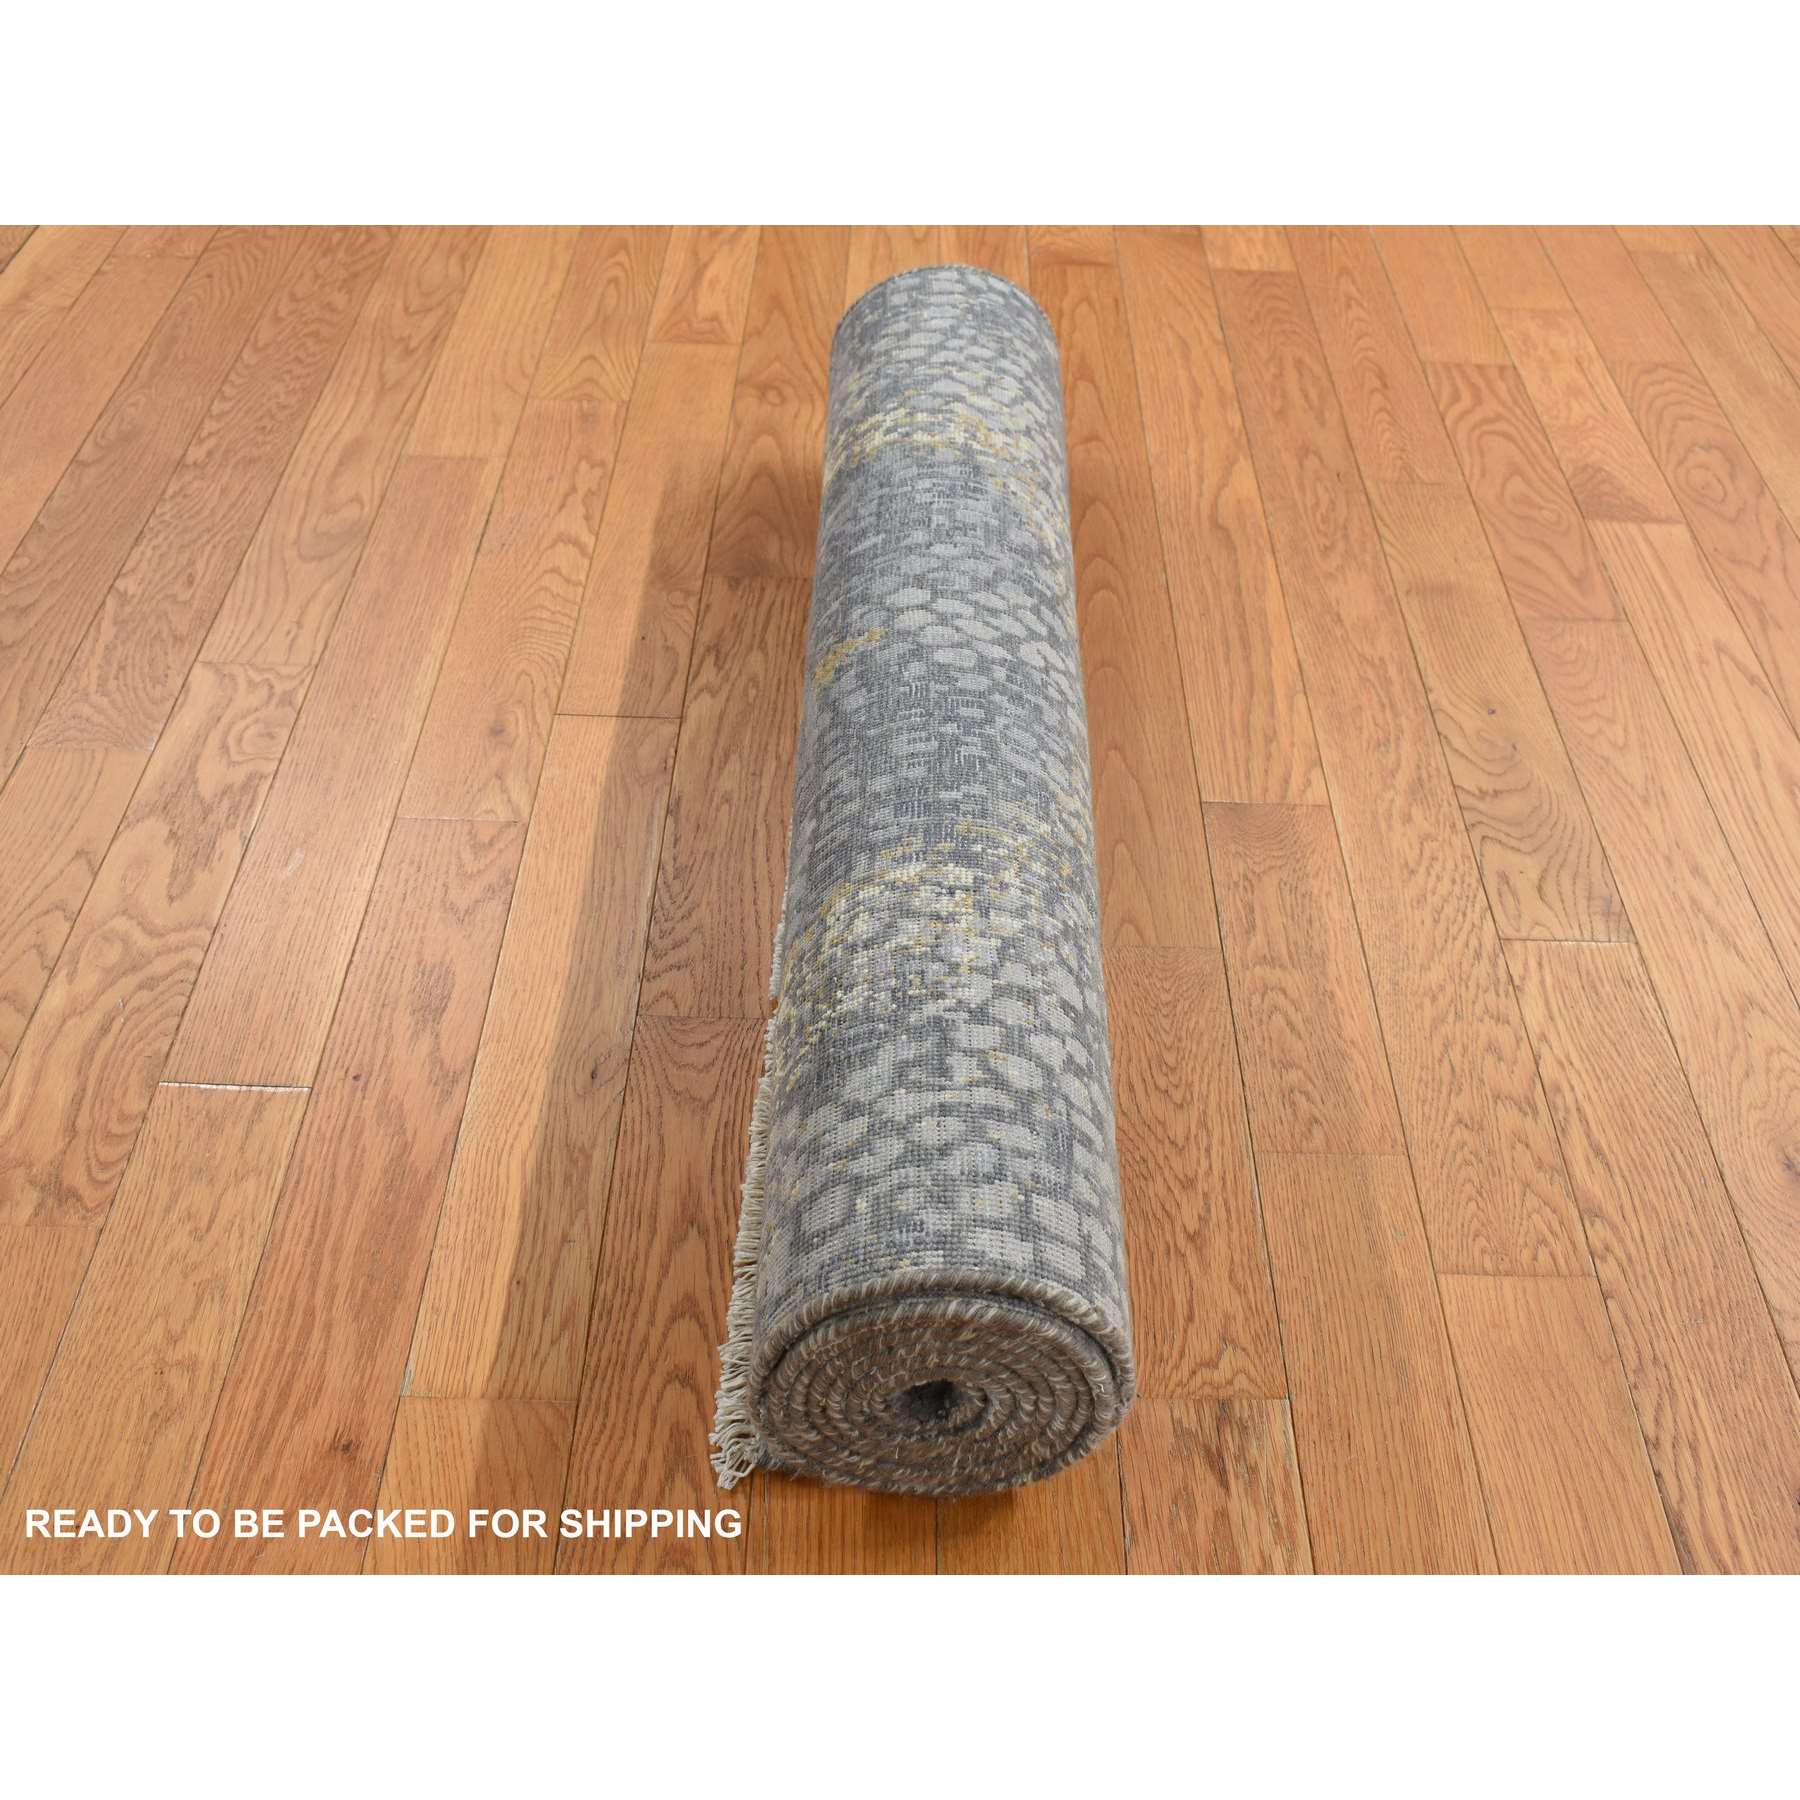 Transitional-Hand-Knotted-Rug-438440